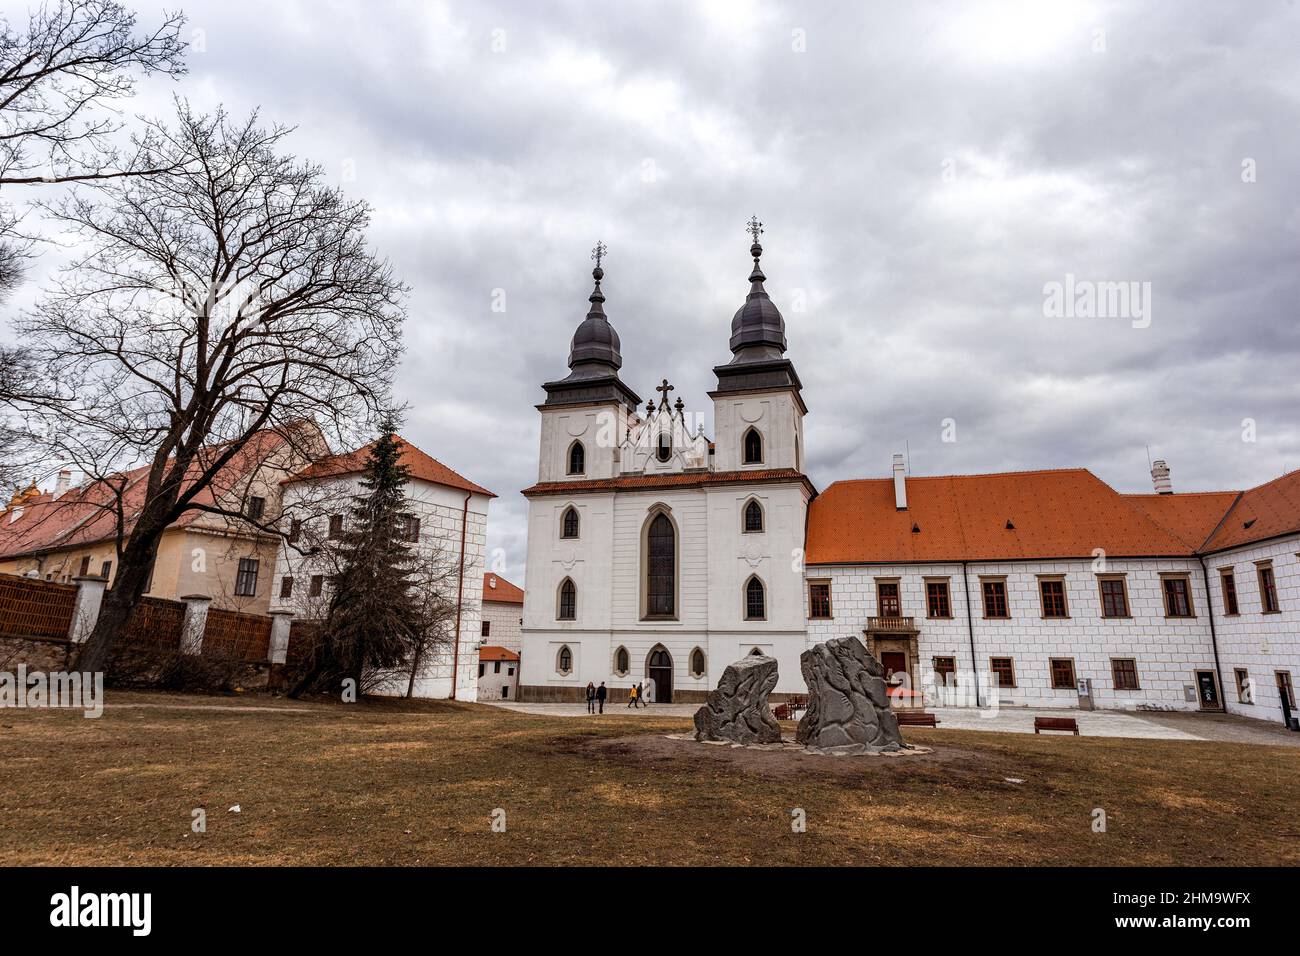 St. Procopius basilica and monastery, jewish town Trebic (the oldest Middle ages settlement of jew community in Central Europe), Moravia, Czechia Stock Photo